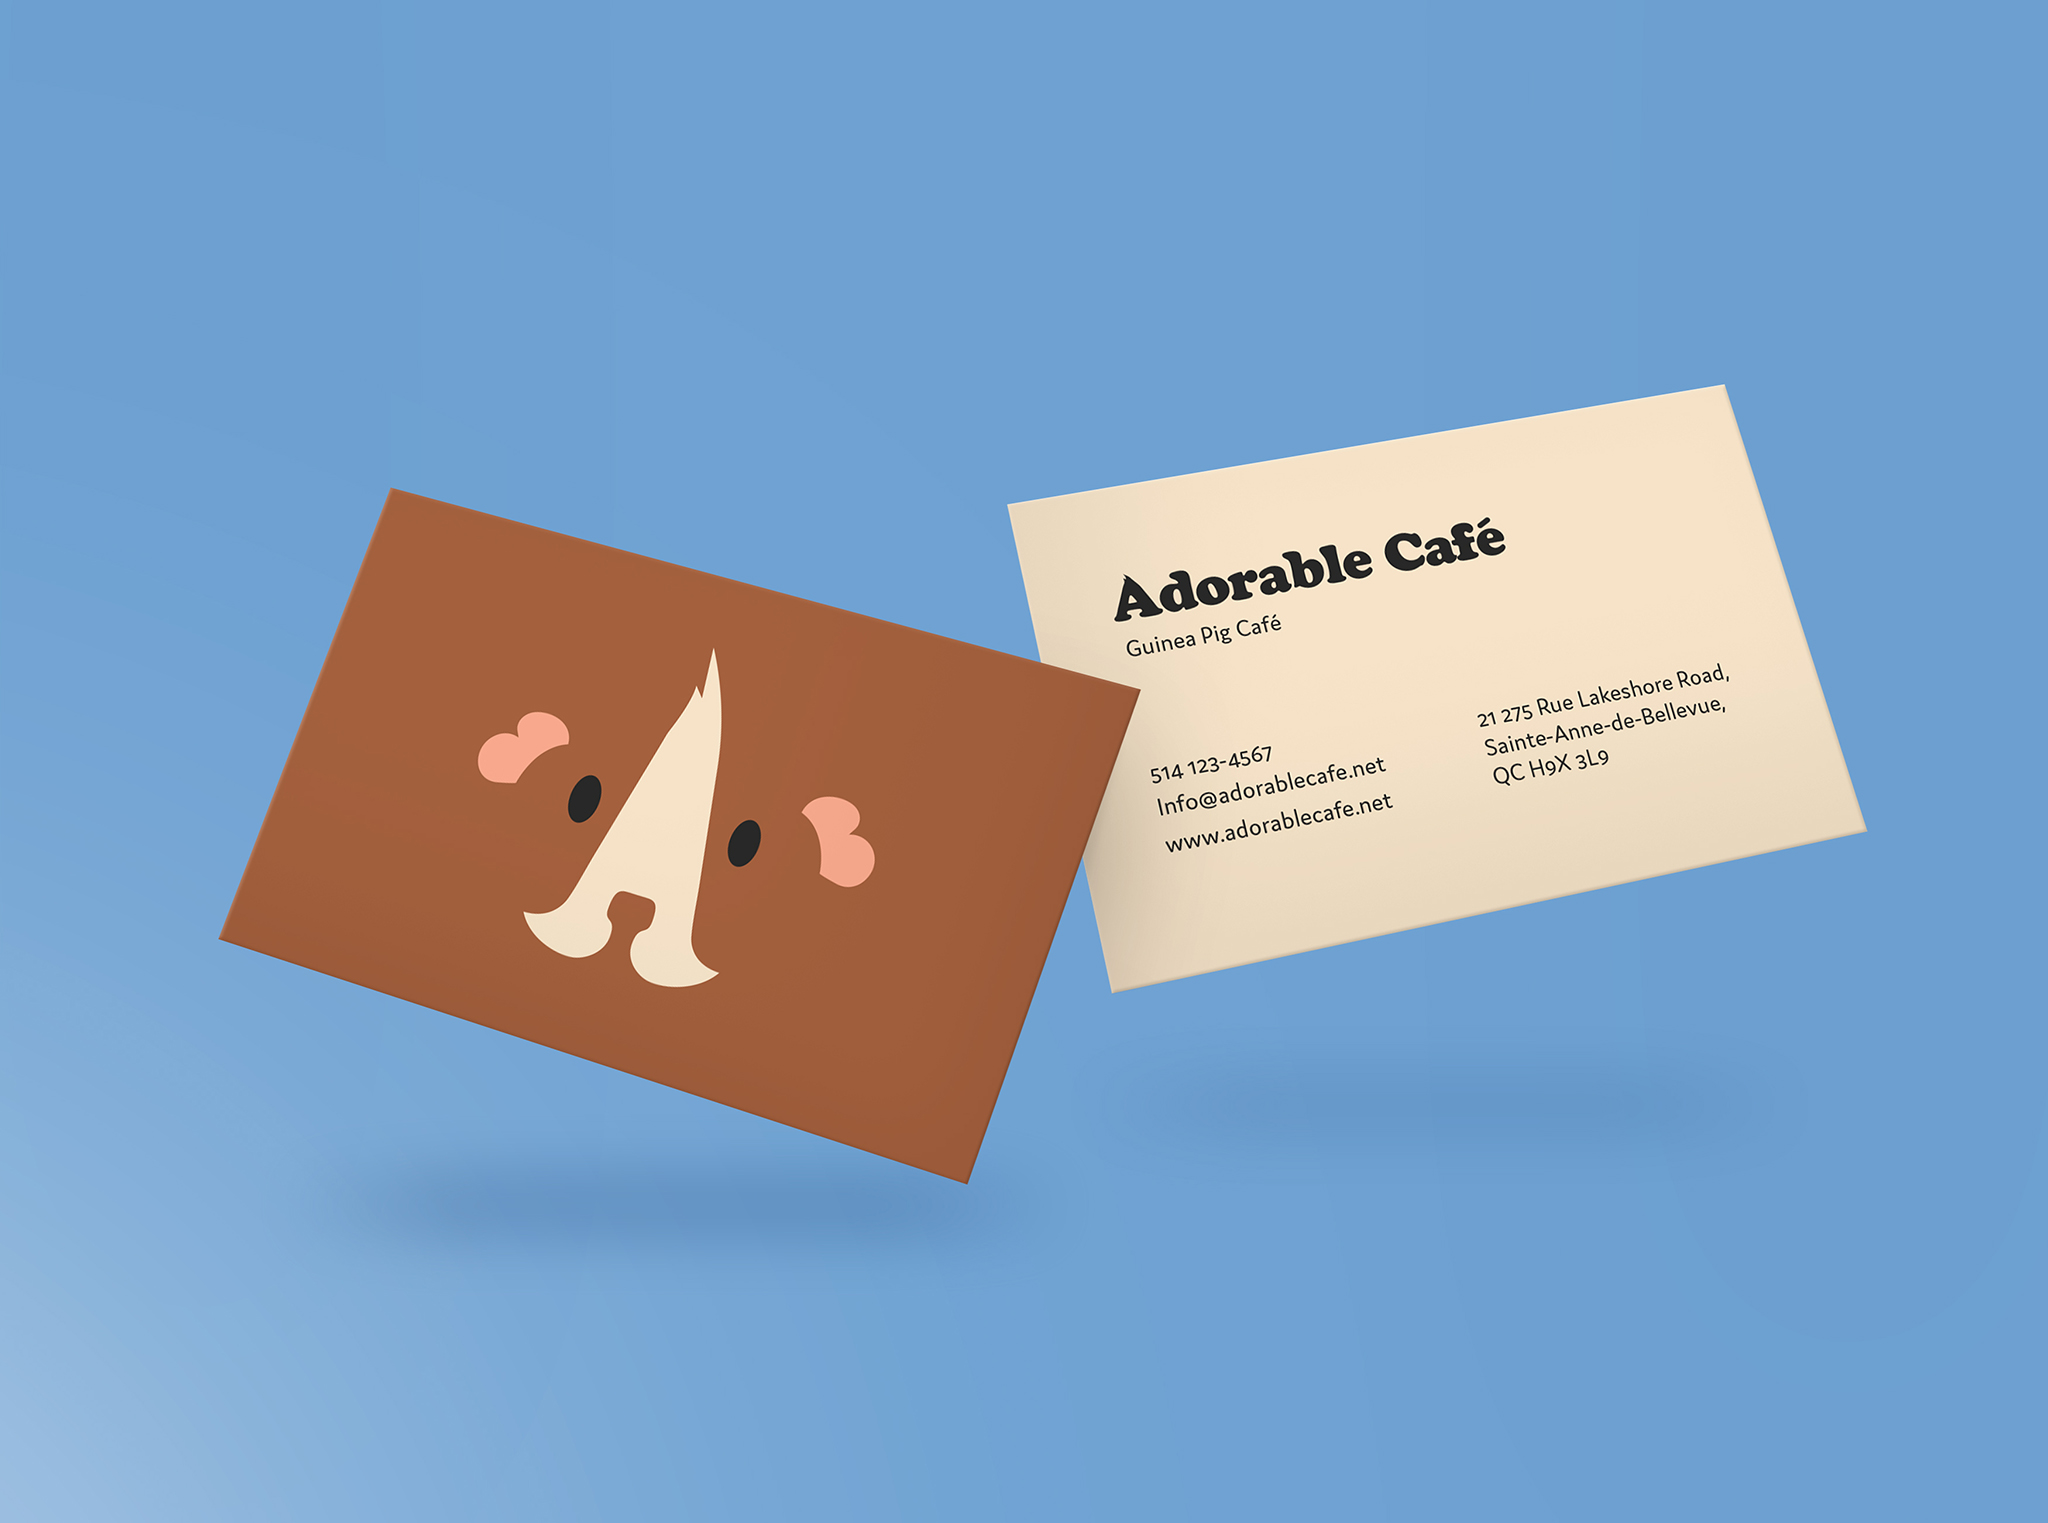 A business card showcasing a guide pig image on the front and text for the business on the back